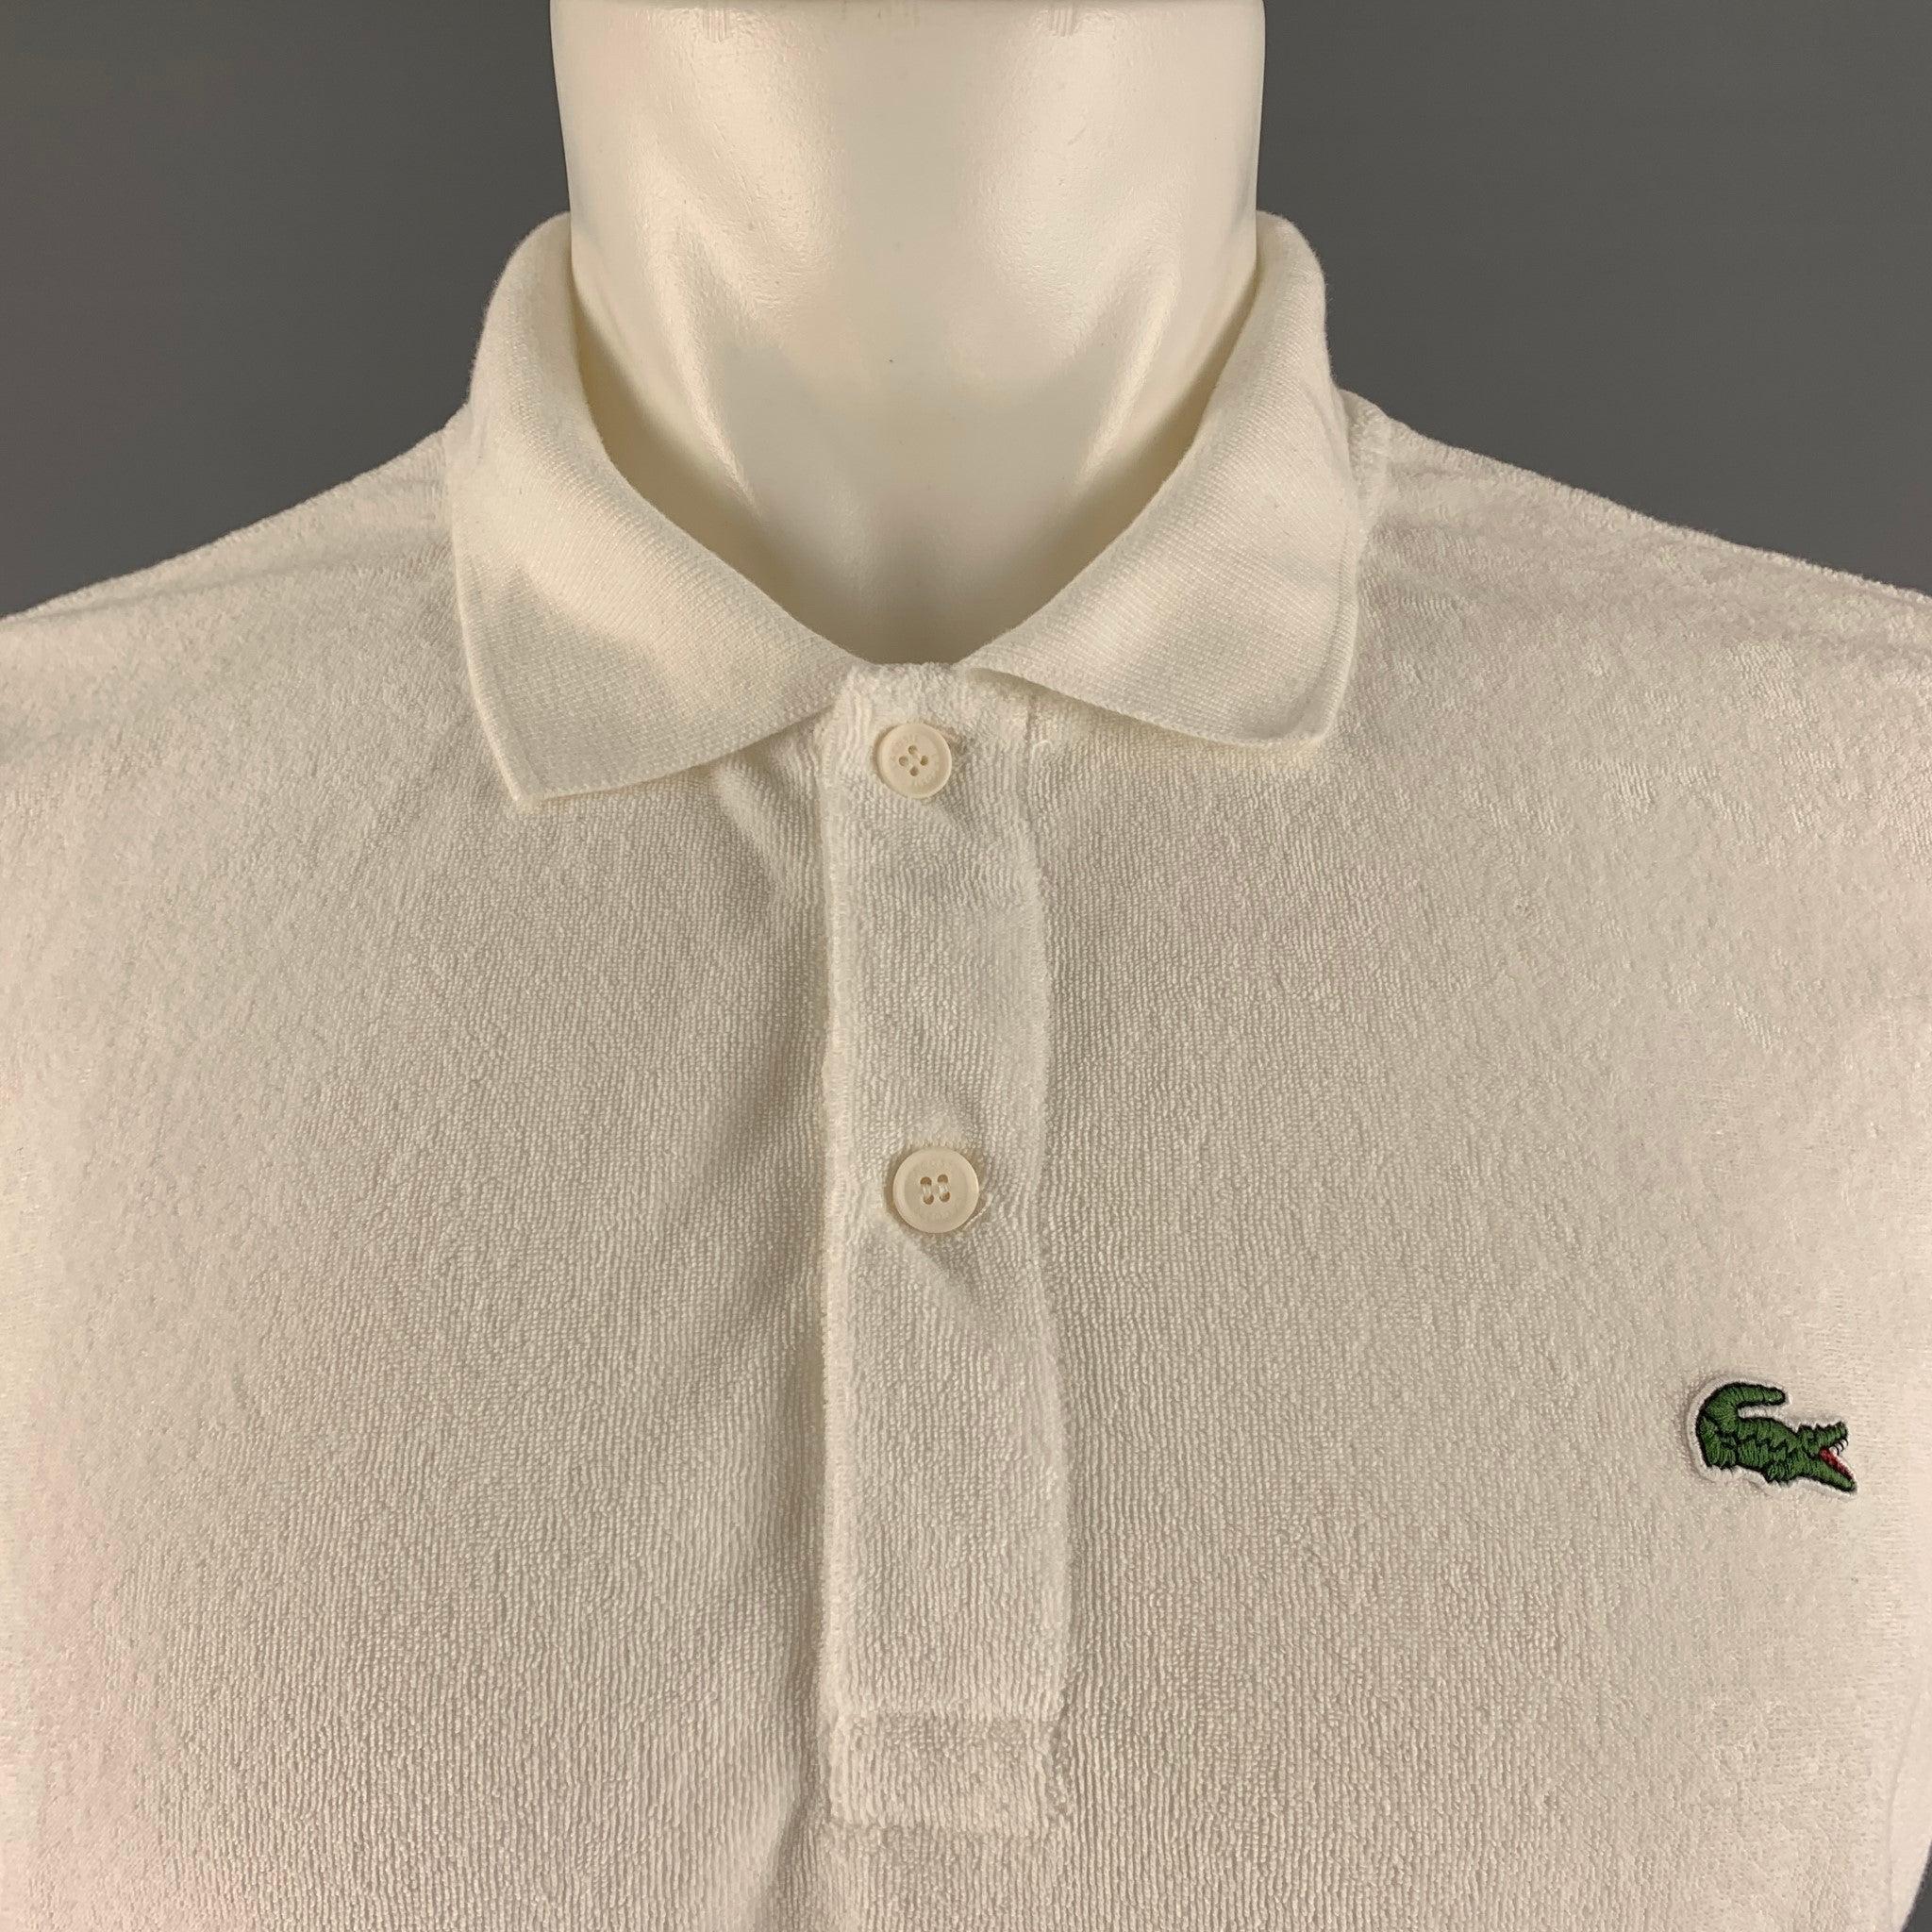 LACOSTE
 polo comes in a white cotton terry cloth material featuring a spread collar and a half buttoned closure.Very Good Pre-Owned Condition. 

Marked:   M 

Measurements: 
 
Shoulder: 18 inches Chest: 43 inches Sleeve: 9 inches Length: 27 inches 